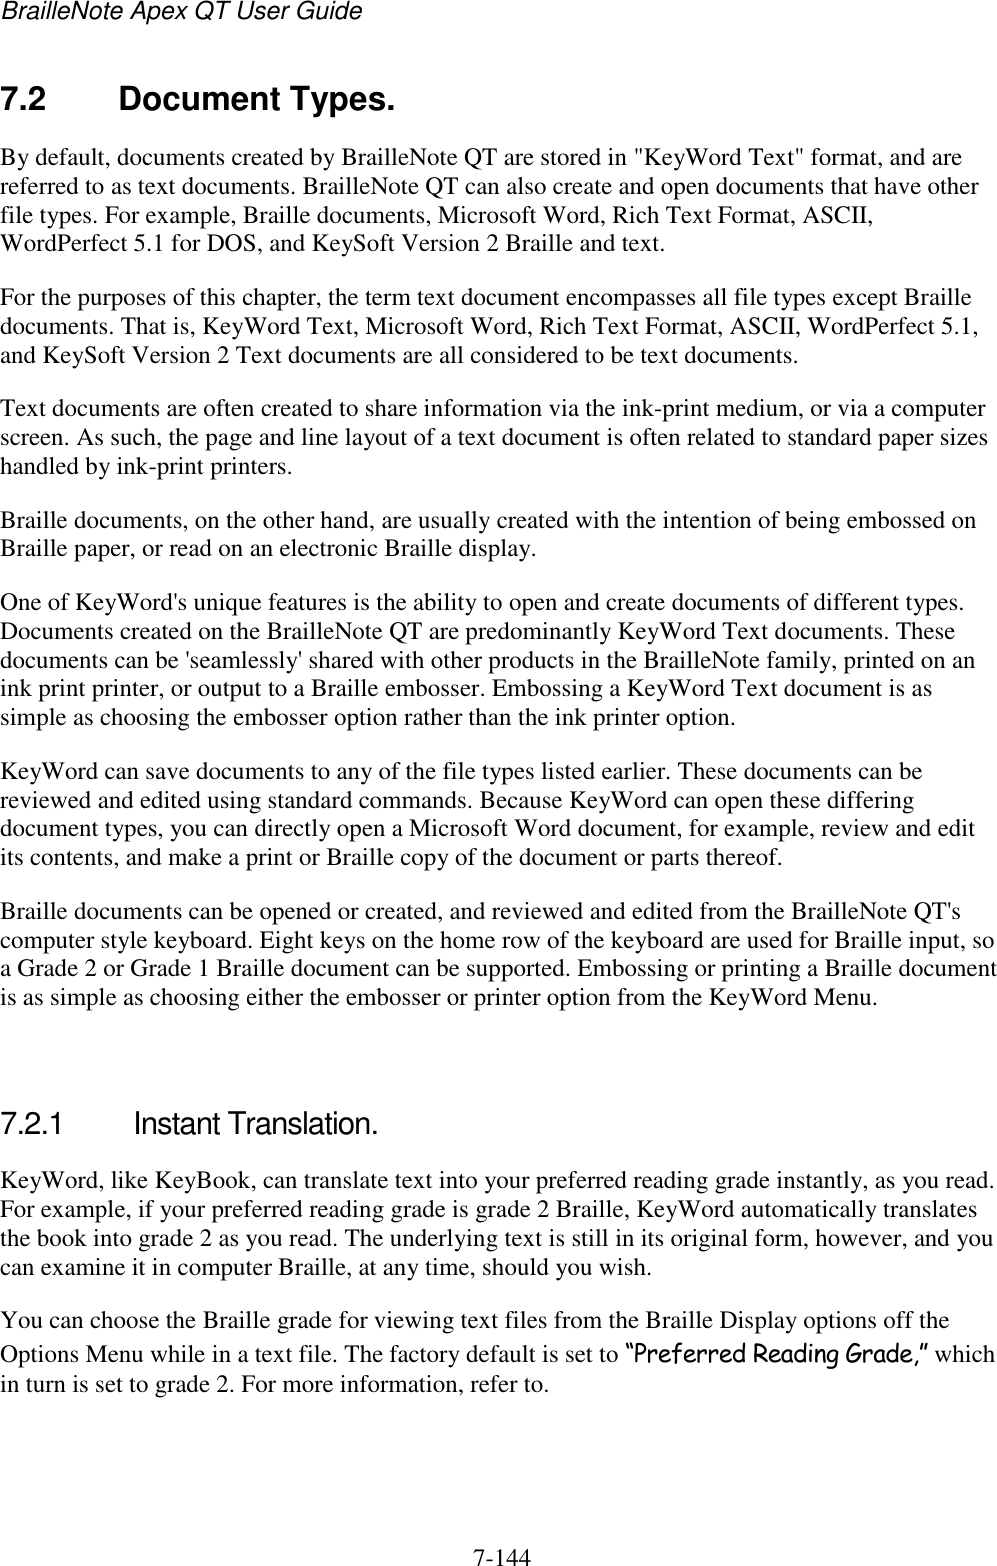 BrailleNote Apex QT User Guide  7-144   7.2  Document Types. By default, documents created by BrailleNote QT are stored in &quot;KeyWord Text&quot; format, and are referred to as text documents. BrailleNote QT can also create and open documents that have other file types. For example, Braille documents, Microsoft Word, Rich Text Format, ASCII, WordPerfect 5.1 for DOS, and KeySoft Version 2 Braille and text. For the purposes of this chapter, the term text document encompasses all file types except Braille documents. That is, KeyWord Text, Microsoft Word, Rich Text Format, ASCII, WordPerfect 5.1, and KeySoft Version 2 Text documents are all considered to be text documents. Text documents are often created to share information via the ink-print medium, or via a computer screen. As such, the page and line layout of a text document is often related to standard paper sizes handled by ink-print printers. Braille documents, on the other hand, are usually created with the intention of being embossed on Braille paper, or read on an electronic Braille display. One of KeyWord&apos;s unique features is the ability to open and create documents of different types. Documents created on the BrailleNote QT are predominantly KeyWord Text documents. These documents can be &apos;seamlessly&apos; shared with other products in the BrailleNote family, printed on an ink print printer, or output to a Braille embosser. Embossing a KeyWord Text document is as simple as choosing the embosser option rather than the ink printer option. KeyWord can save documents to any of the file types listed earlier. These documents can be reviewed and edited using standard commands. Because KeyWord can open these differing document types, you can directly open a Microsoft Word document, for example, review and edit its contents, and make a print or Braille copy of the document or parts thereof. Braille documents can be opened or created, and reviewed and edited from the BrailleNote QT&apos;s computer style keyboard. Eight keys on the home row of the keyboard are used for Braille input, so a Grade 2 or Grade 1 Braille document can be supported. Embossing or printing a Braille document is as simple as choosing either the embosser or printer option from the KeyWord Menu.   7.2.1  Instant Translation. KeyWord, like KeyBook, can translate text into your preferred reading grade instantly, as you read. For example, if your preferred reading grade is grade 2 Braille, KeyWord automatically translates the book into grade 2 as you read. The underlying text is still in its original form, however, and you can examine it in computer Braille, at any time, should you wish. You can choose the Braille grade for viewing text files from the Braille Display options off the Options Menu while in a text file. The factory default is set to “Preferred Reading Grade,” which in turn is set to grade 2. For more information, refer to.   